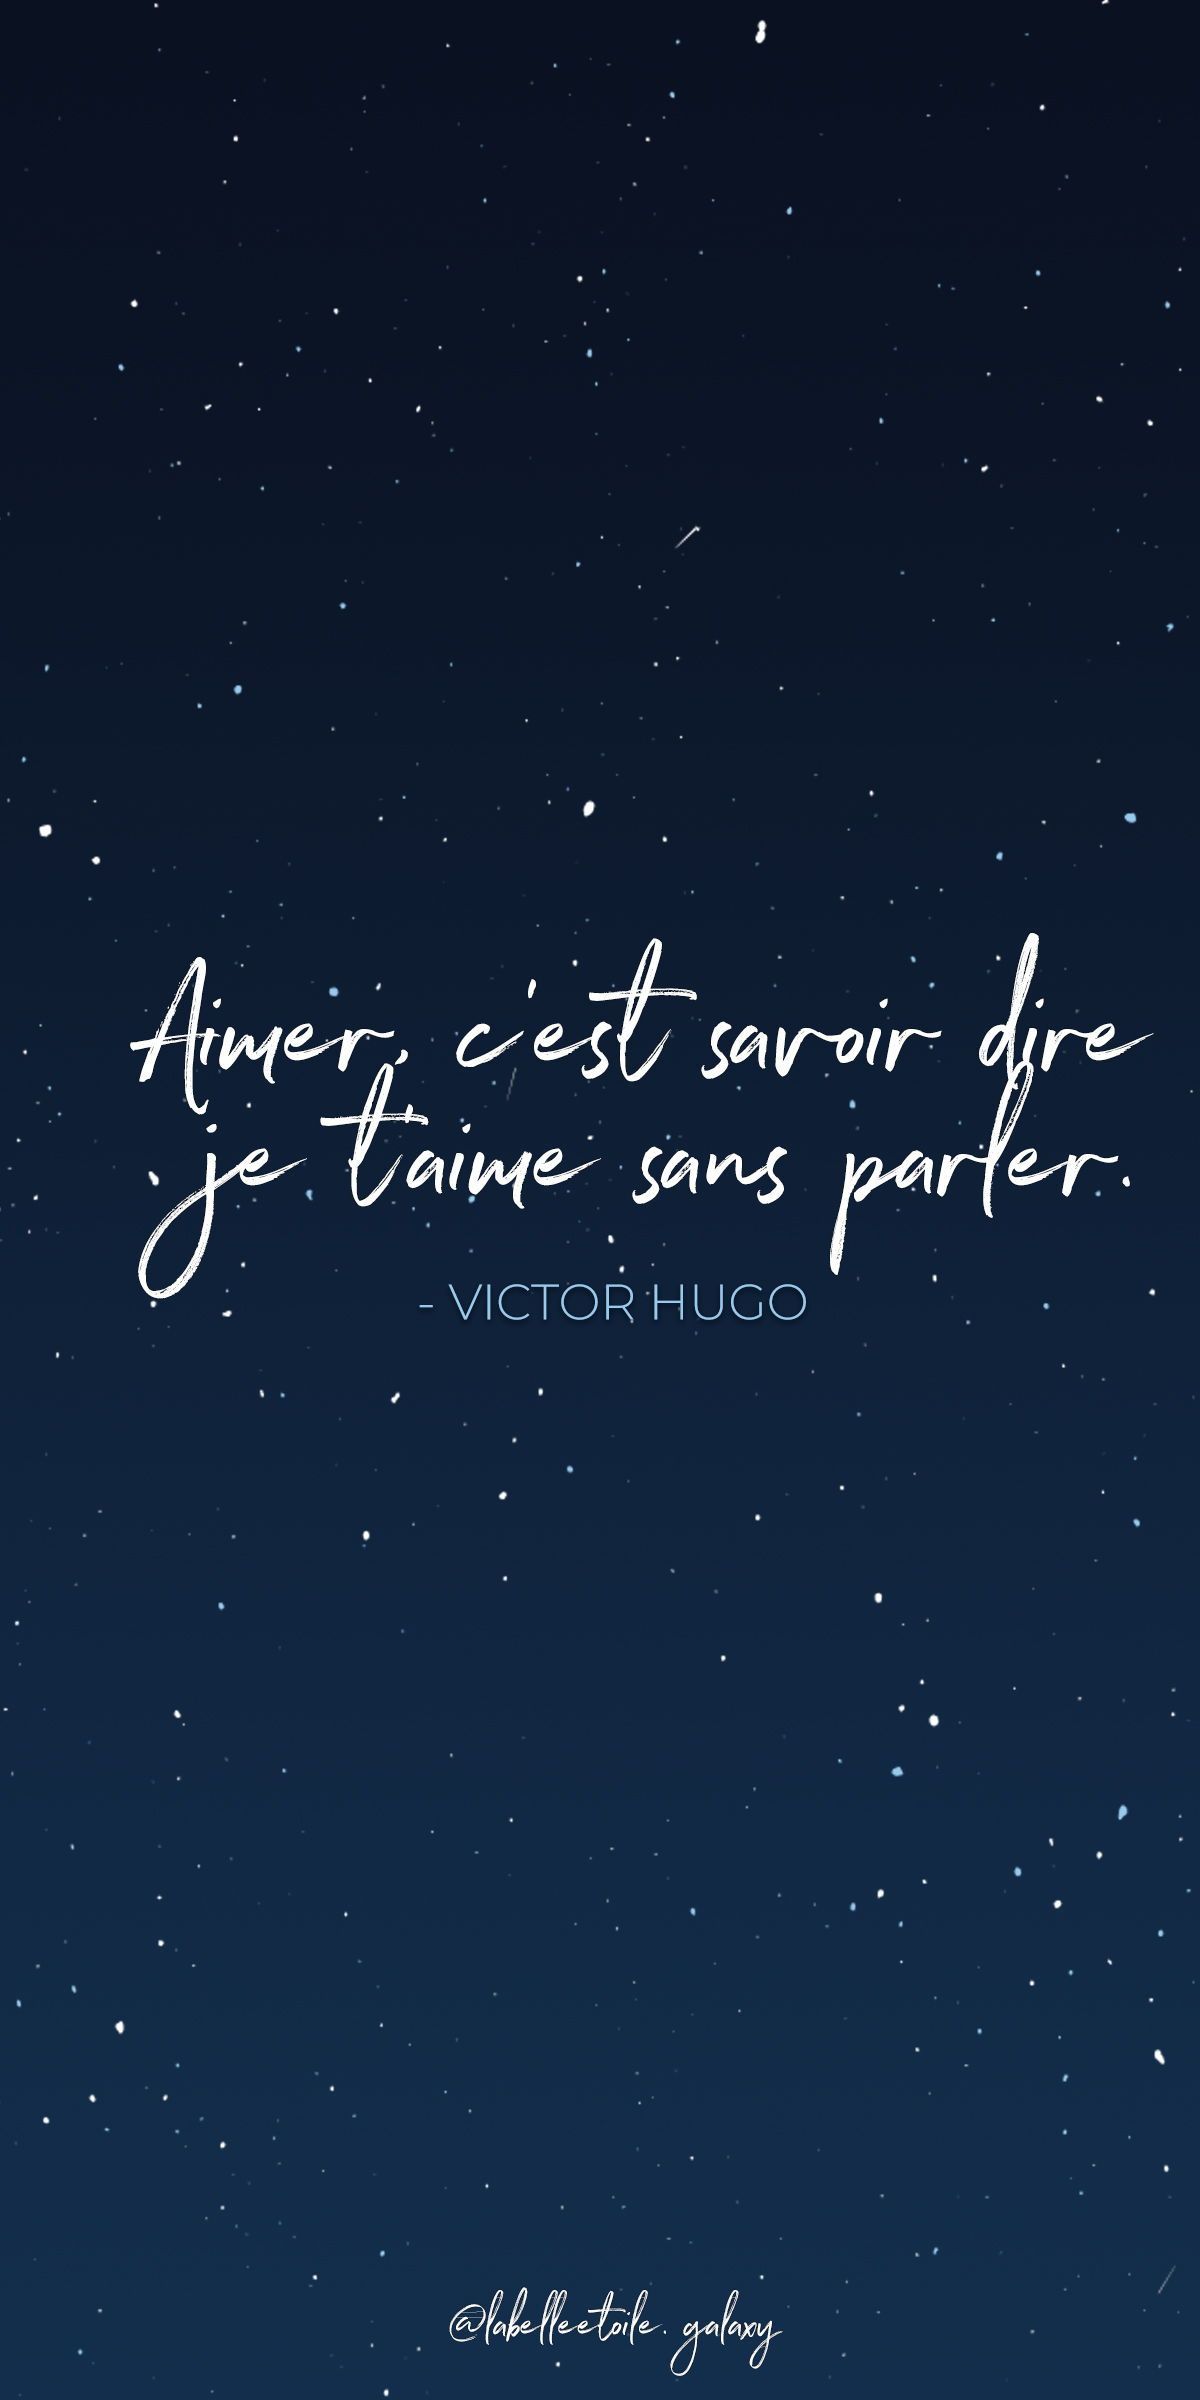 ✨ To love is to know how to say I love you without speaking. ✨ Victor Hugo, French writer and poet - ✨ Bon. Romantic french phrases, French quotes, French phrases